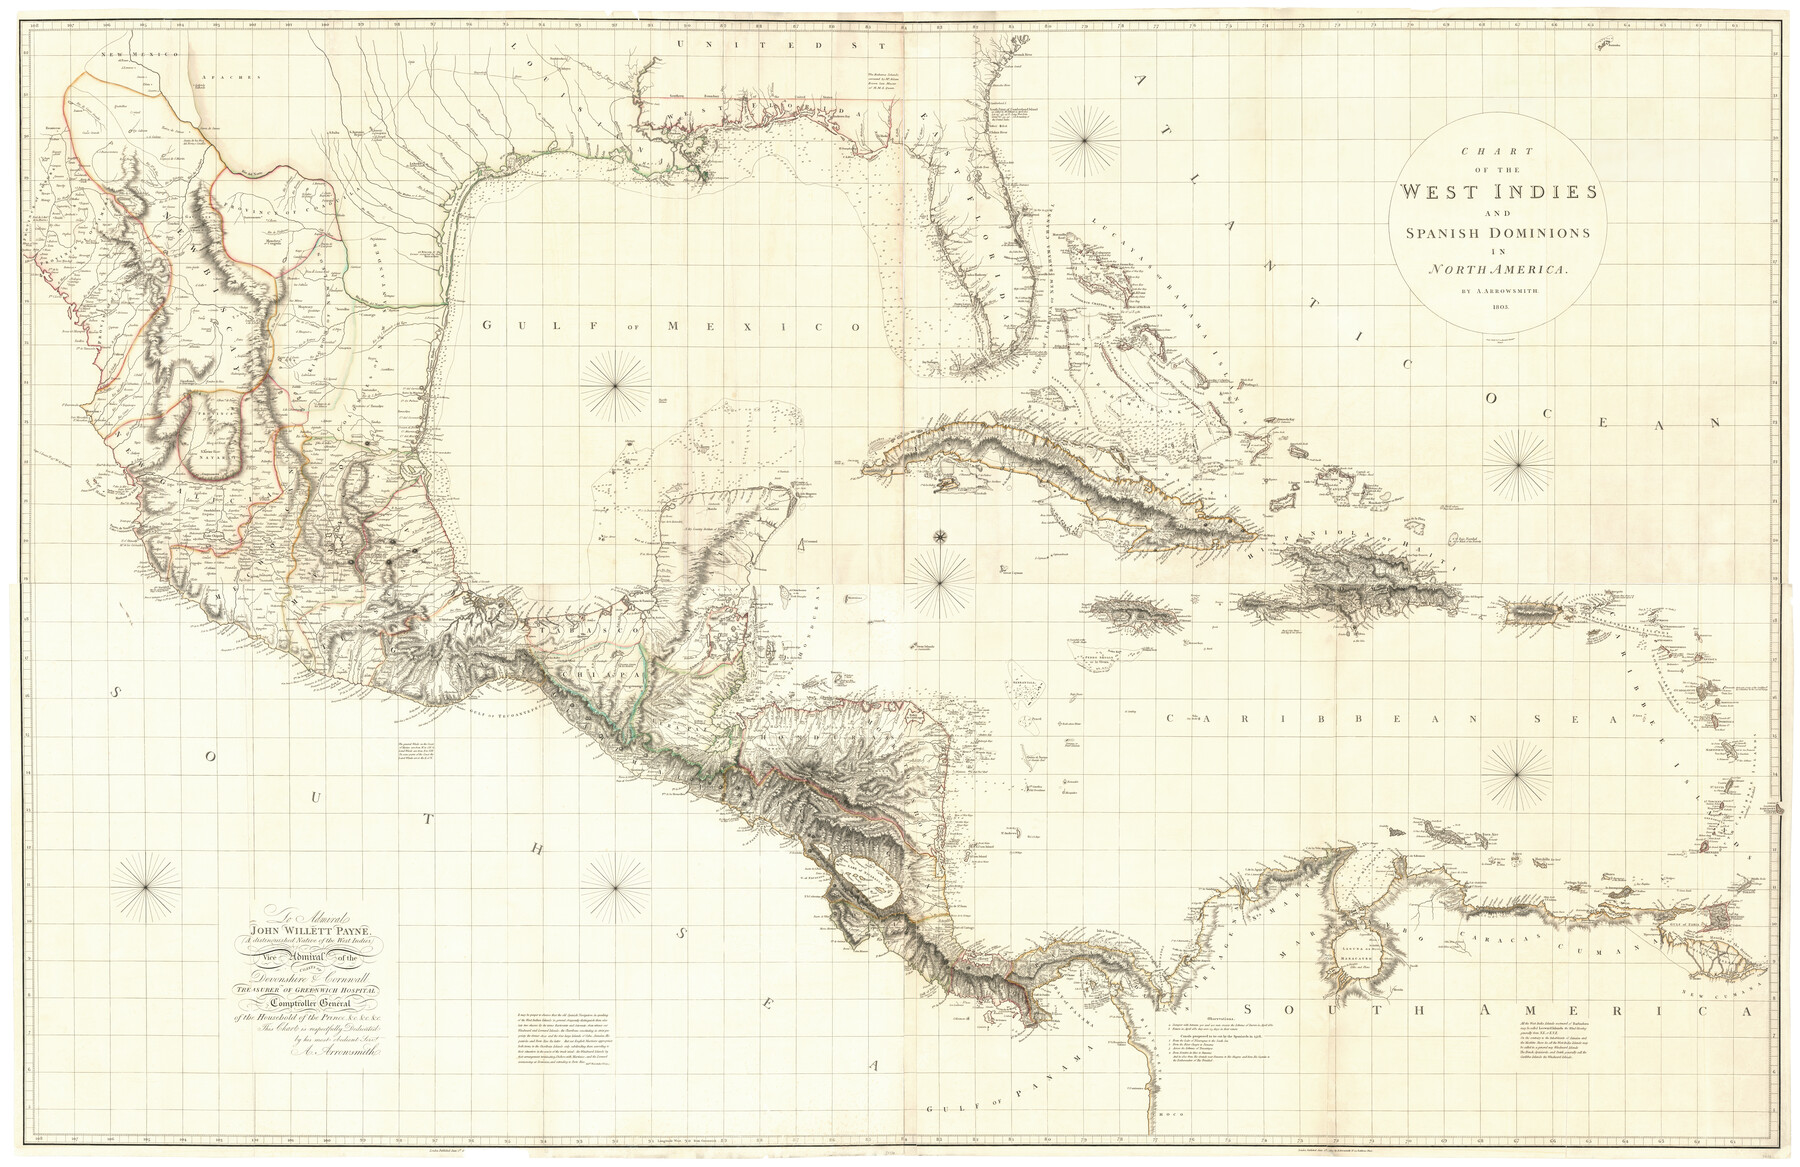 97153, Chart of the West Indies and Spanish Dominions in North America, General Map Collection